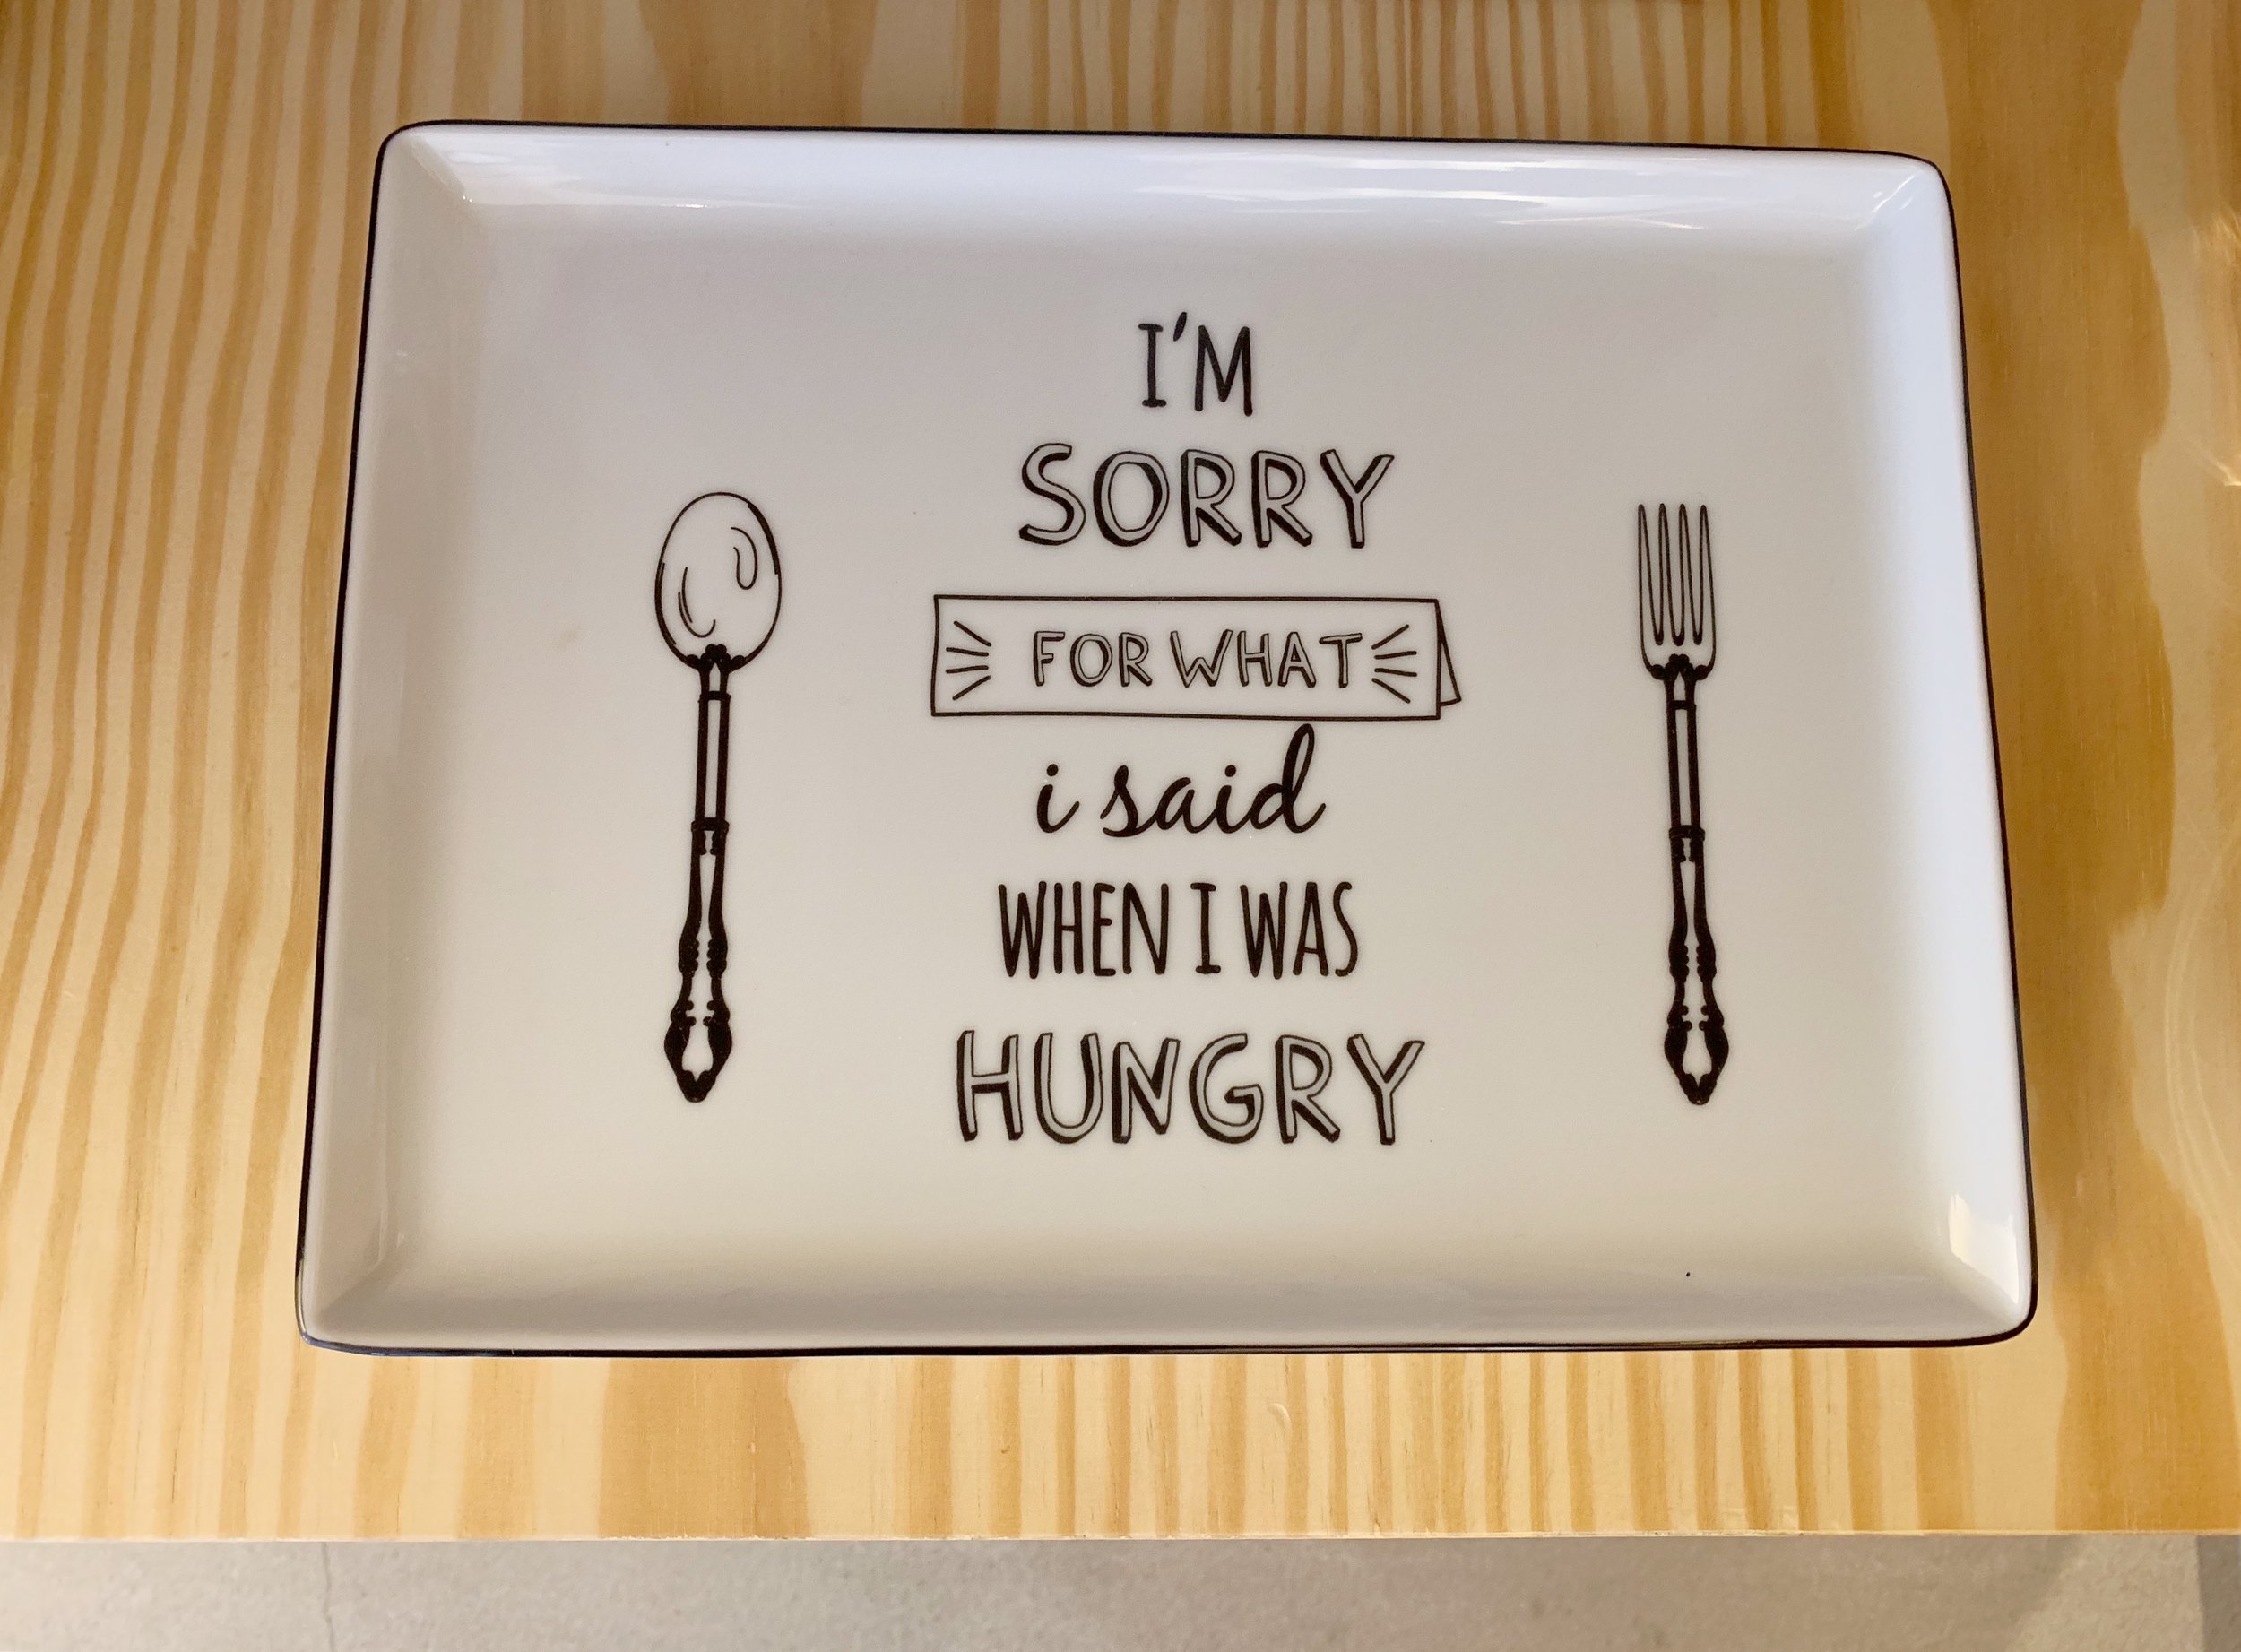 This hotel was perfect. How many times have I had this EXACT thought? Plates like these and other items could be purchased from the hotel gift shop.